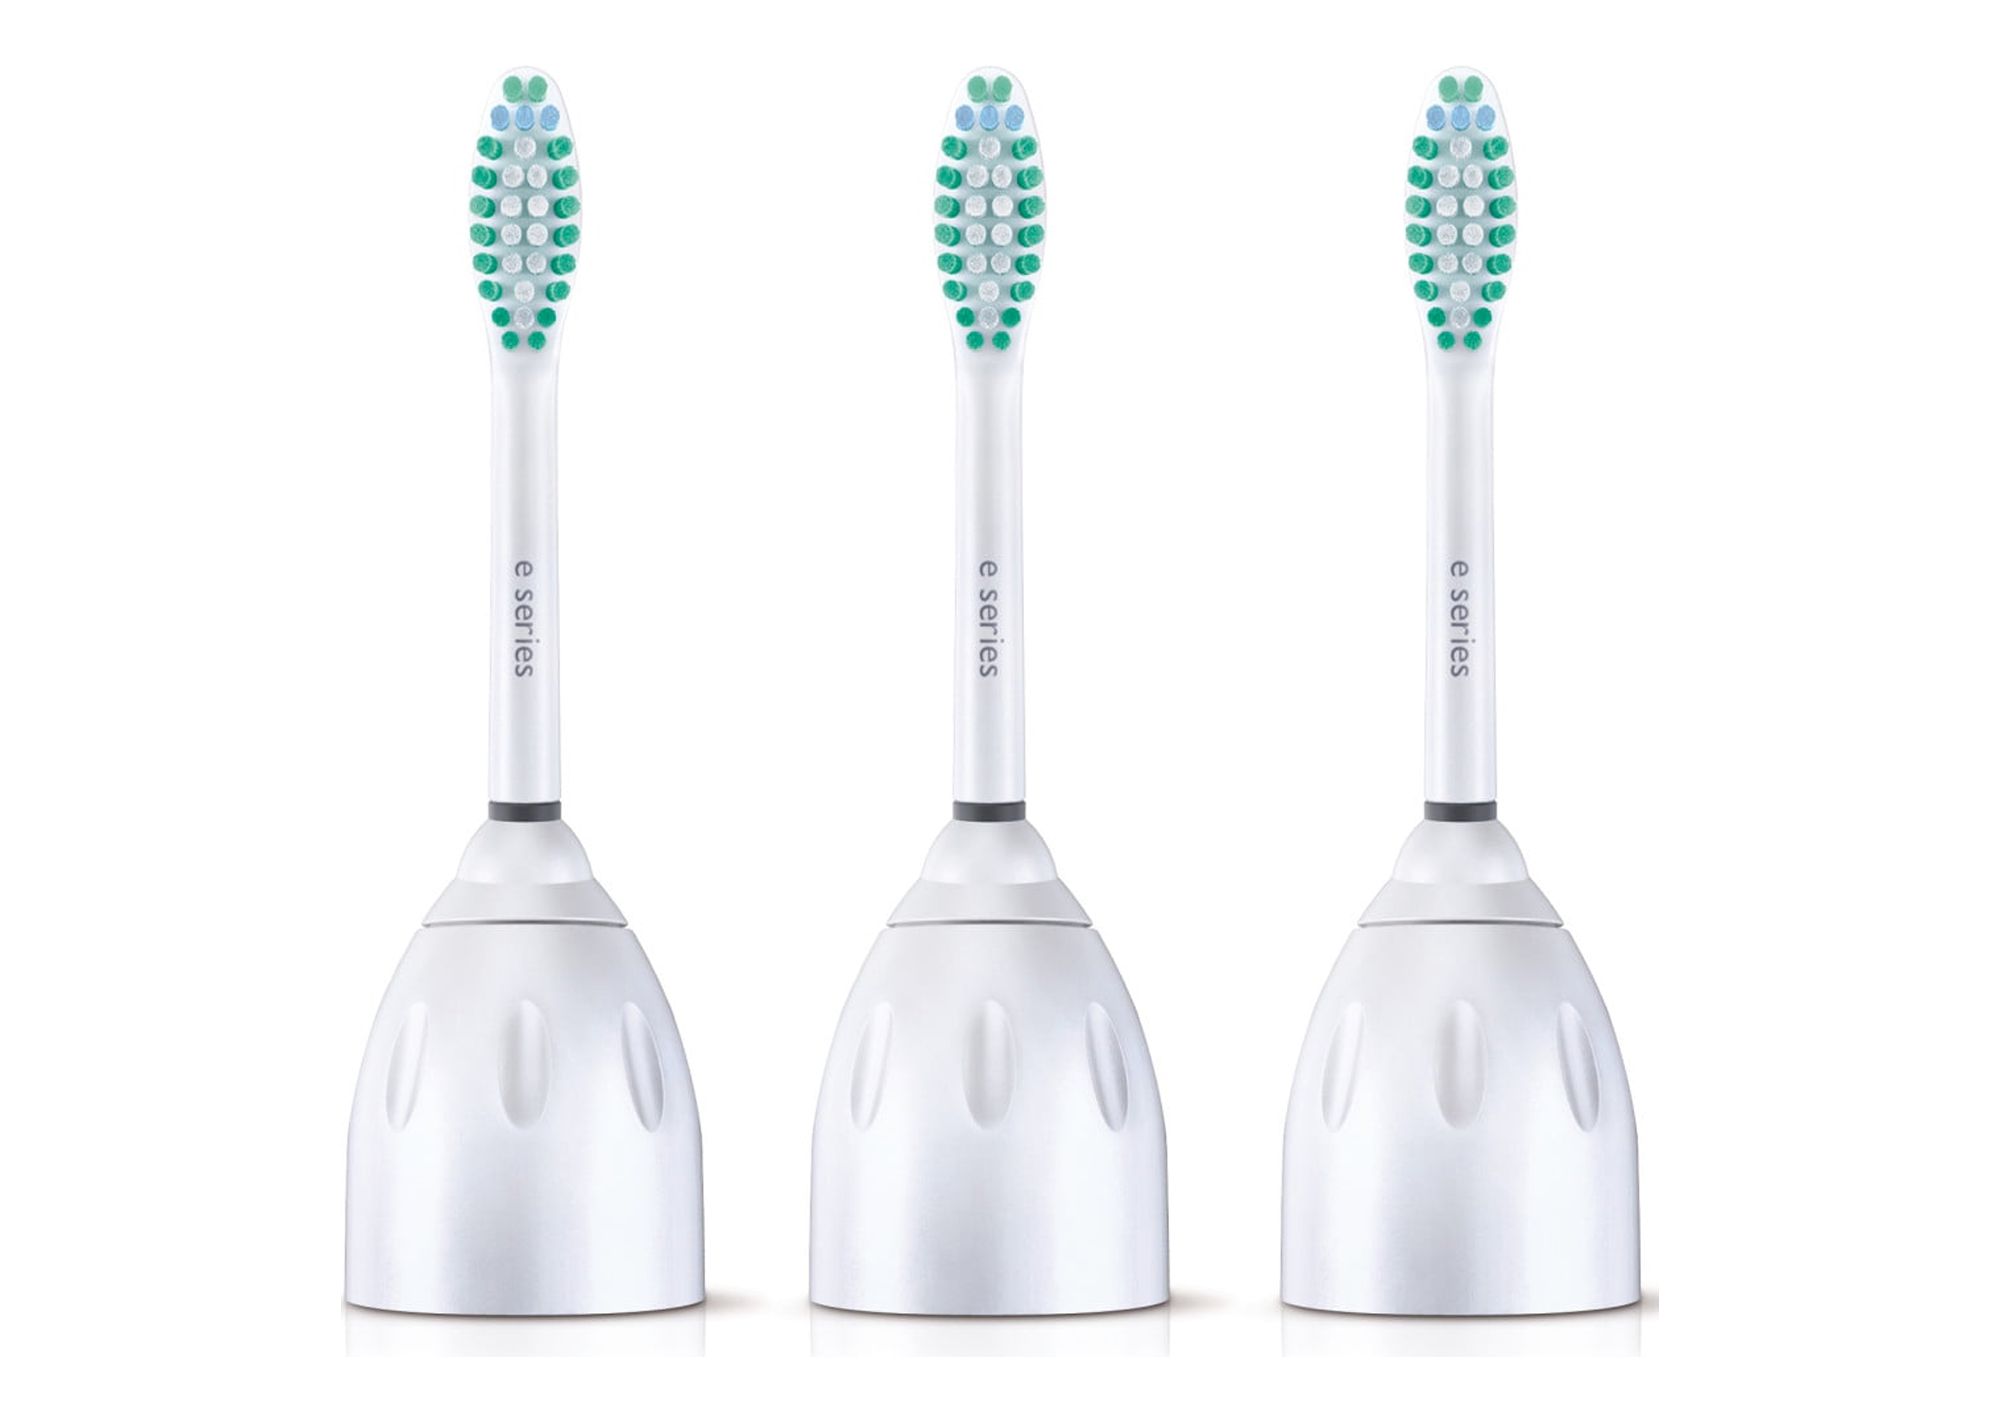 Philips Sonicare E-Series Replacement Toothbrush Heads, HX7023/64, 3-pk - image 1 of 14